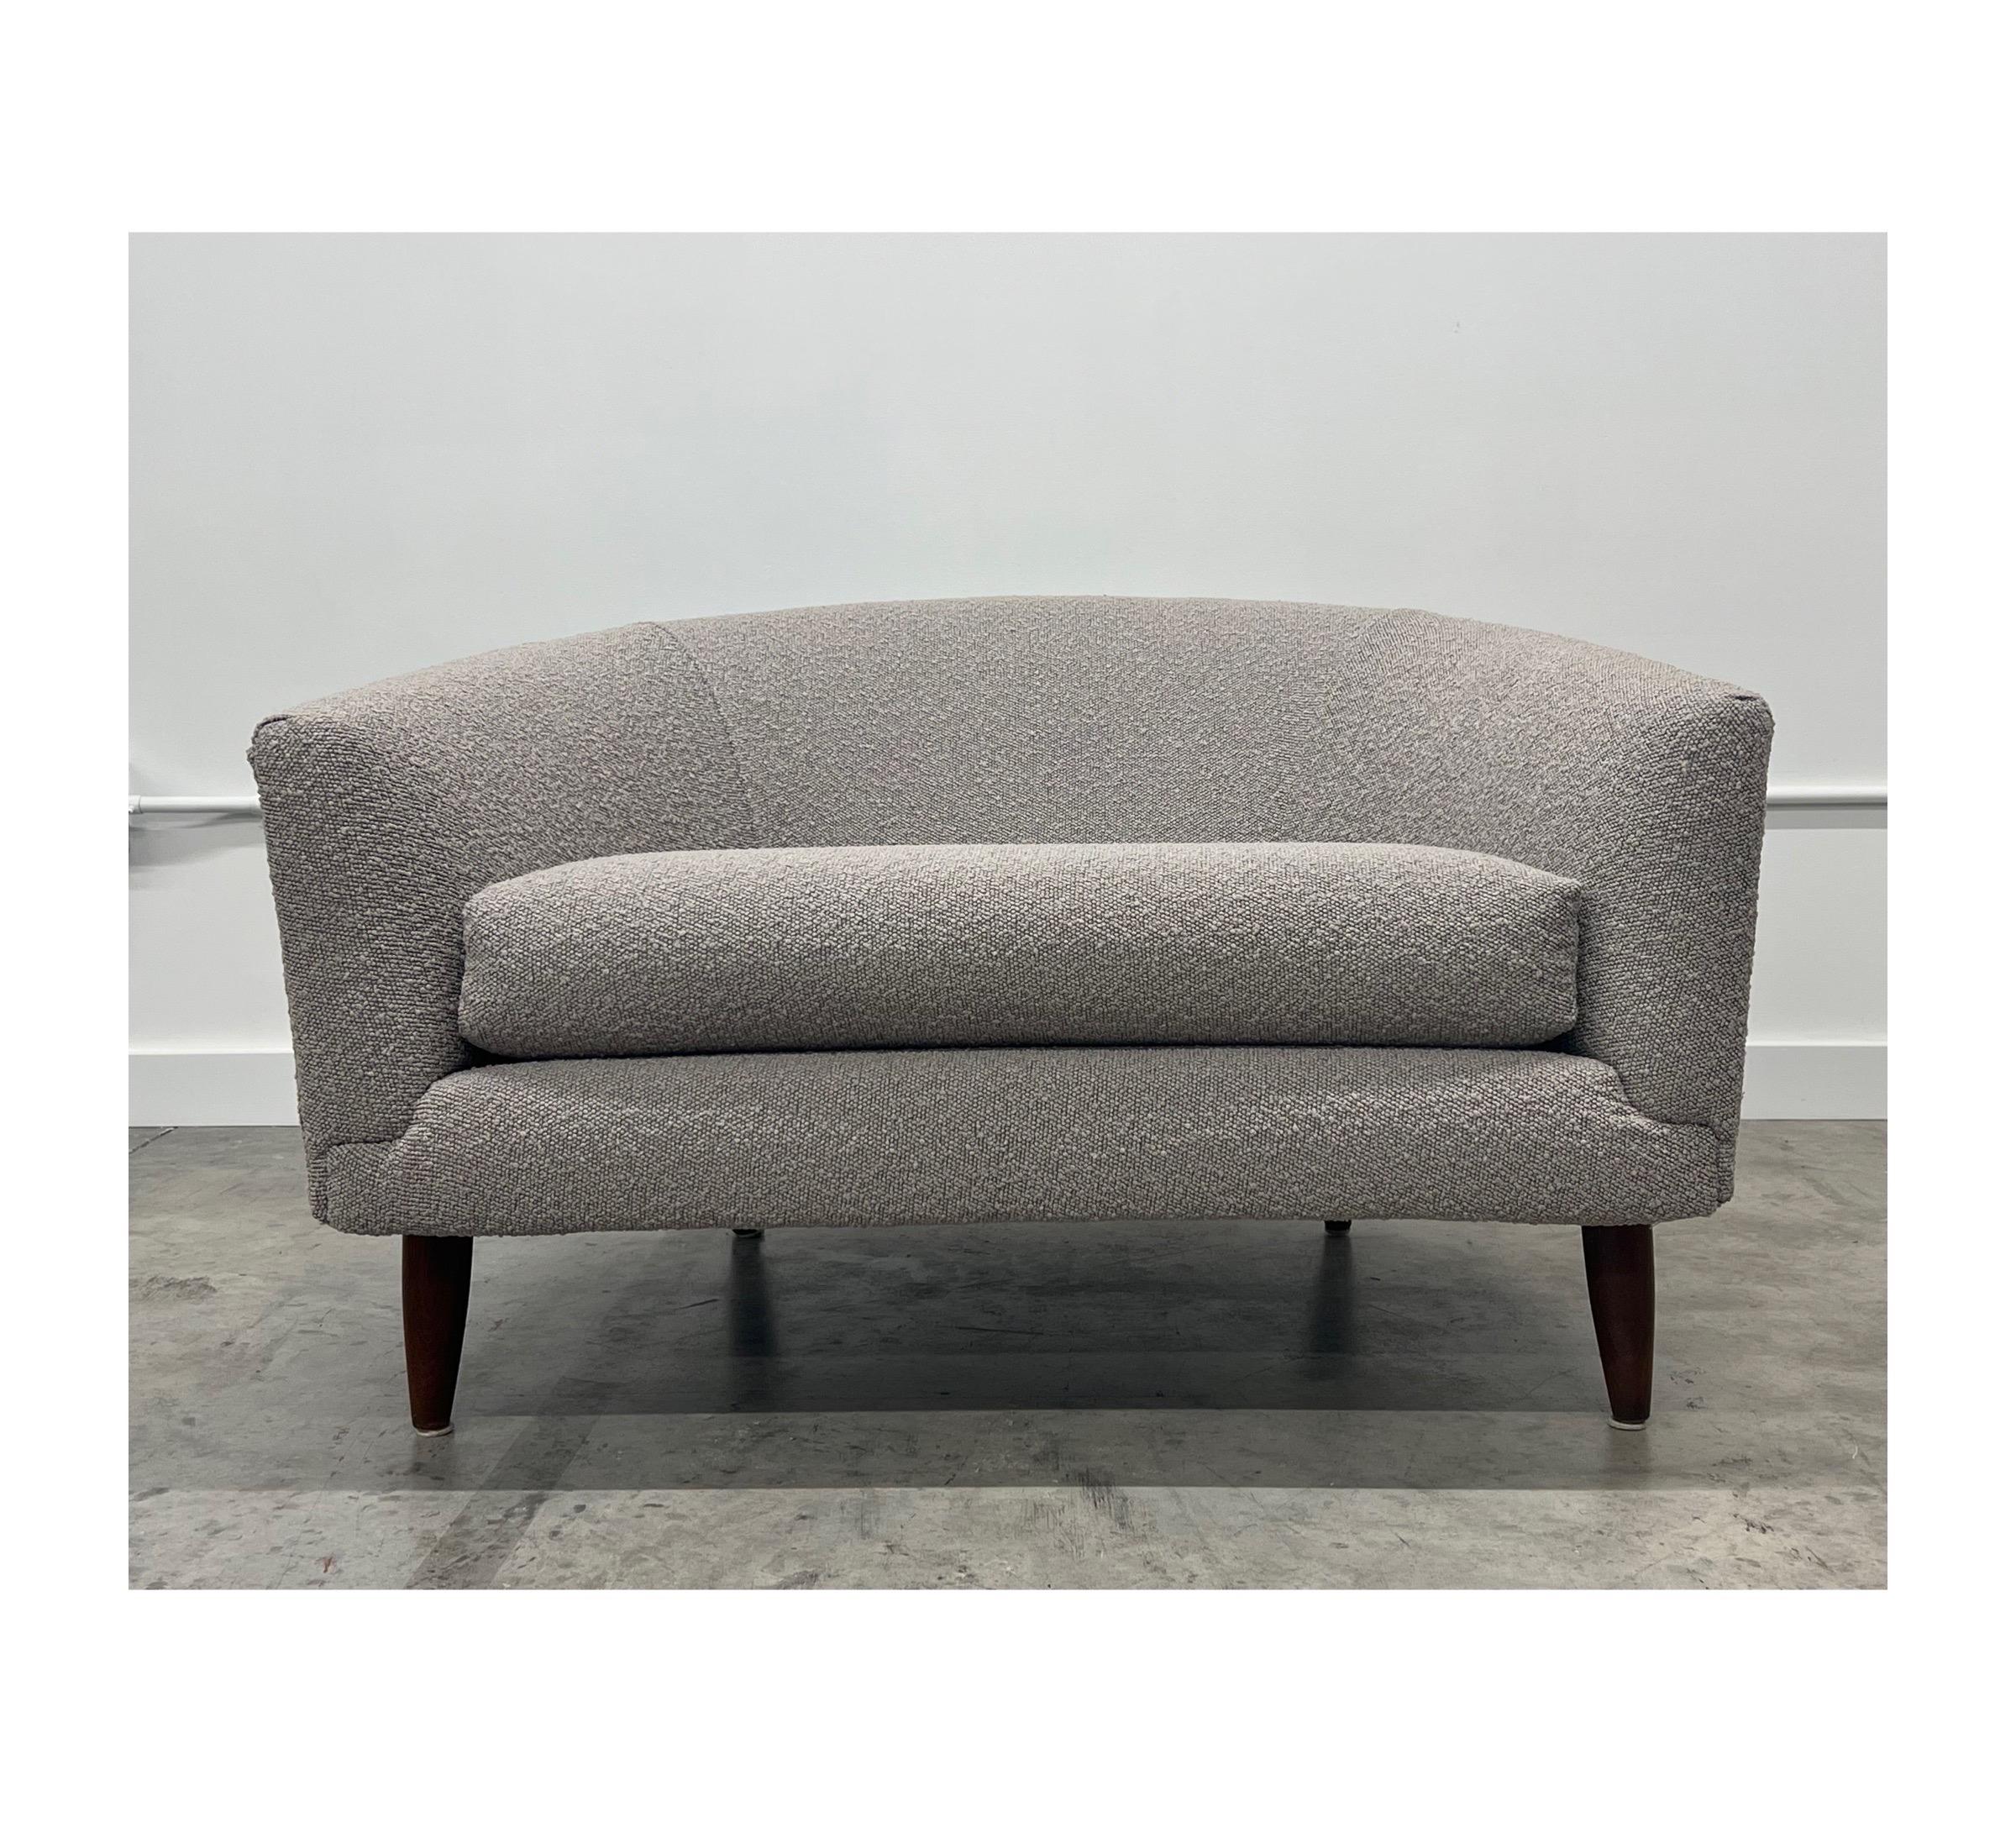 Matching “cloud” chair to the “cloud” sofa designed by Adrian Pearsall for Craft Associates circa 1950s. We reupholstered the chair in a bouclé fabric with new foam. It’s immensely comfortable with a low back design and wide seat width. Once you